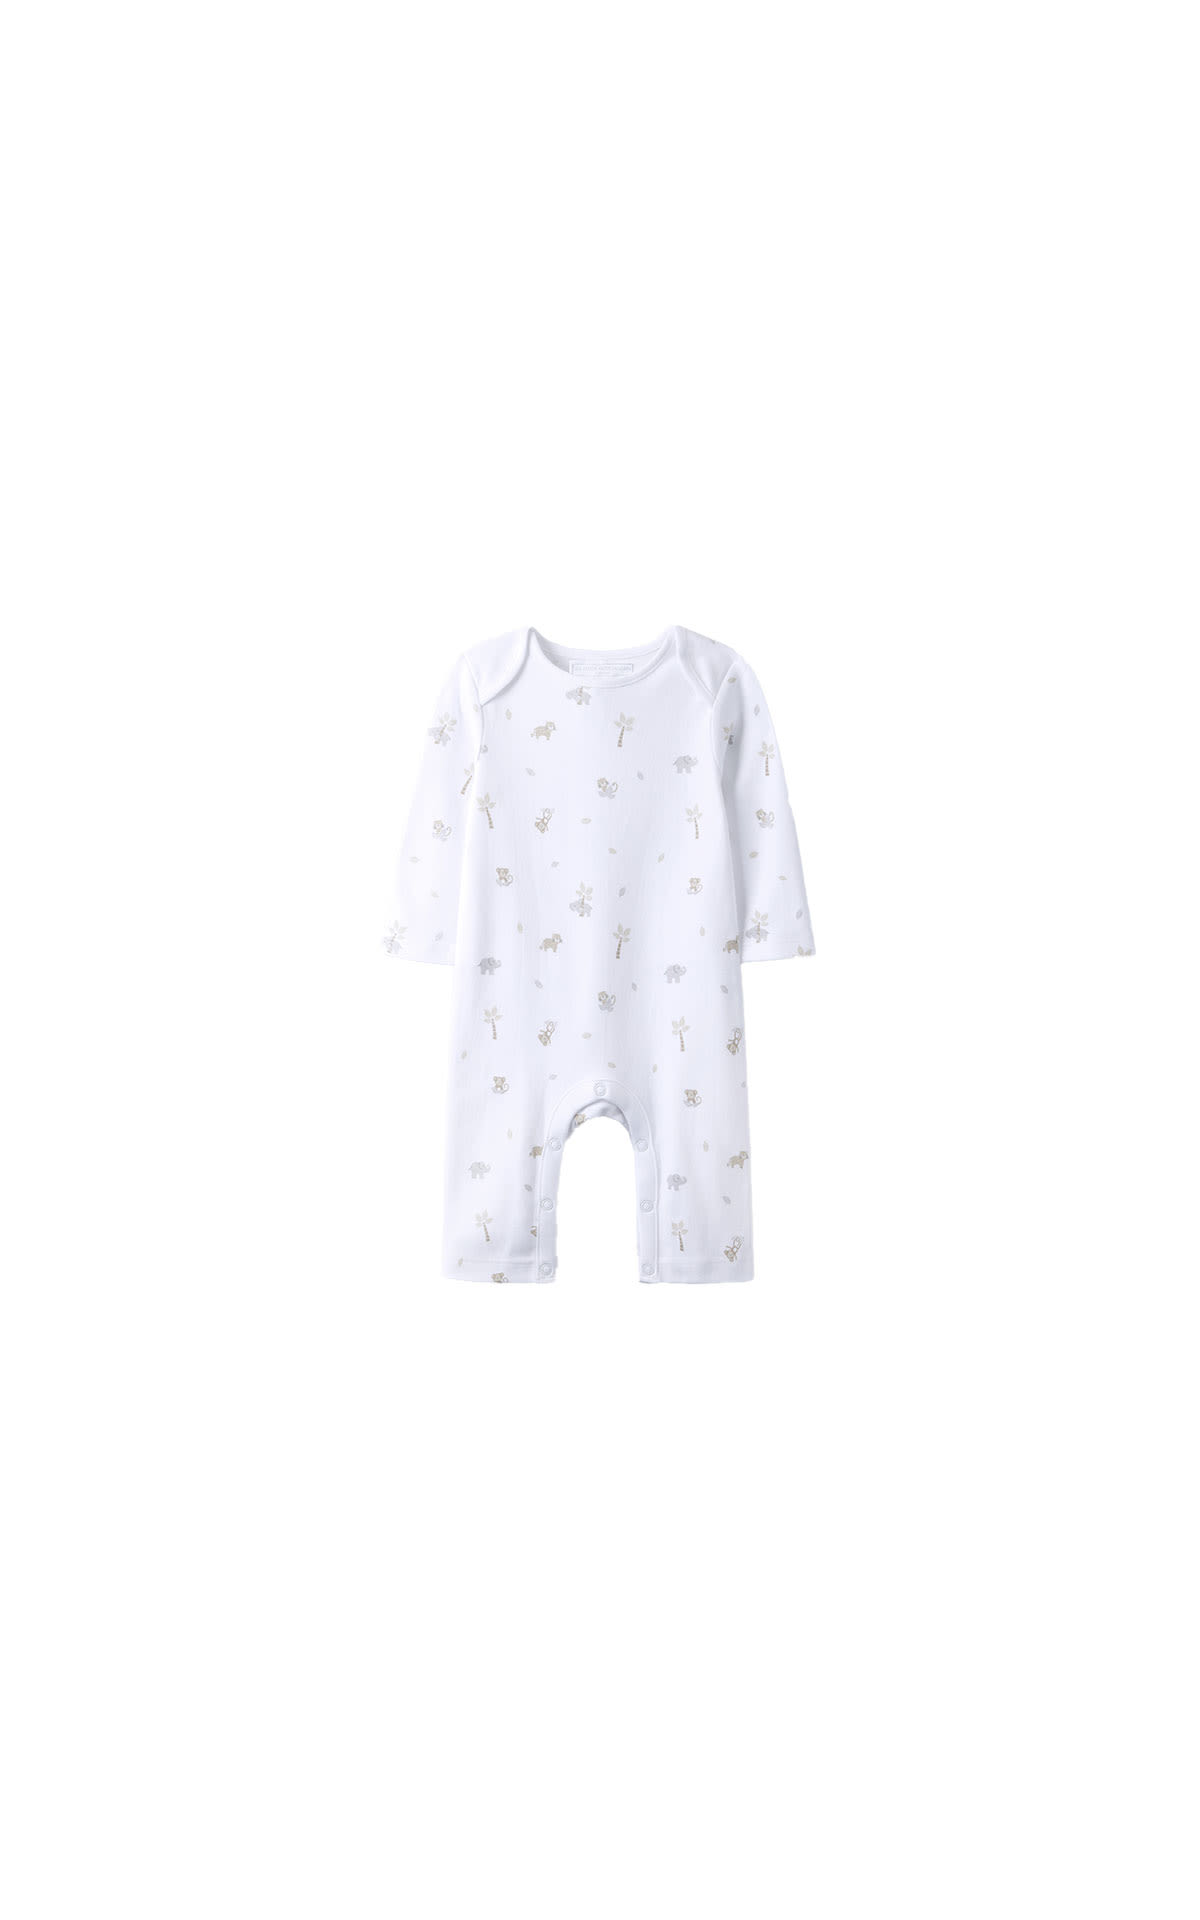 The White Company Safari jungle sleepsuit from Bicester Village